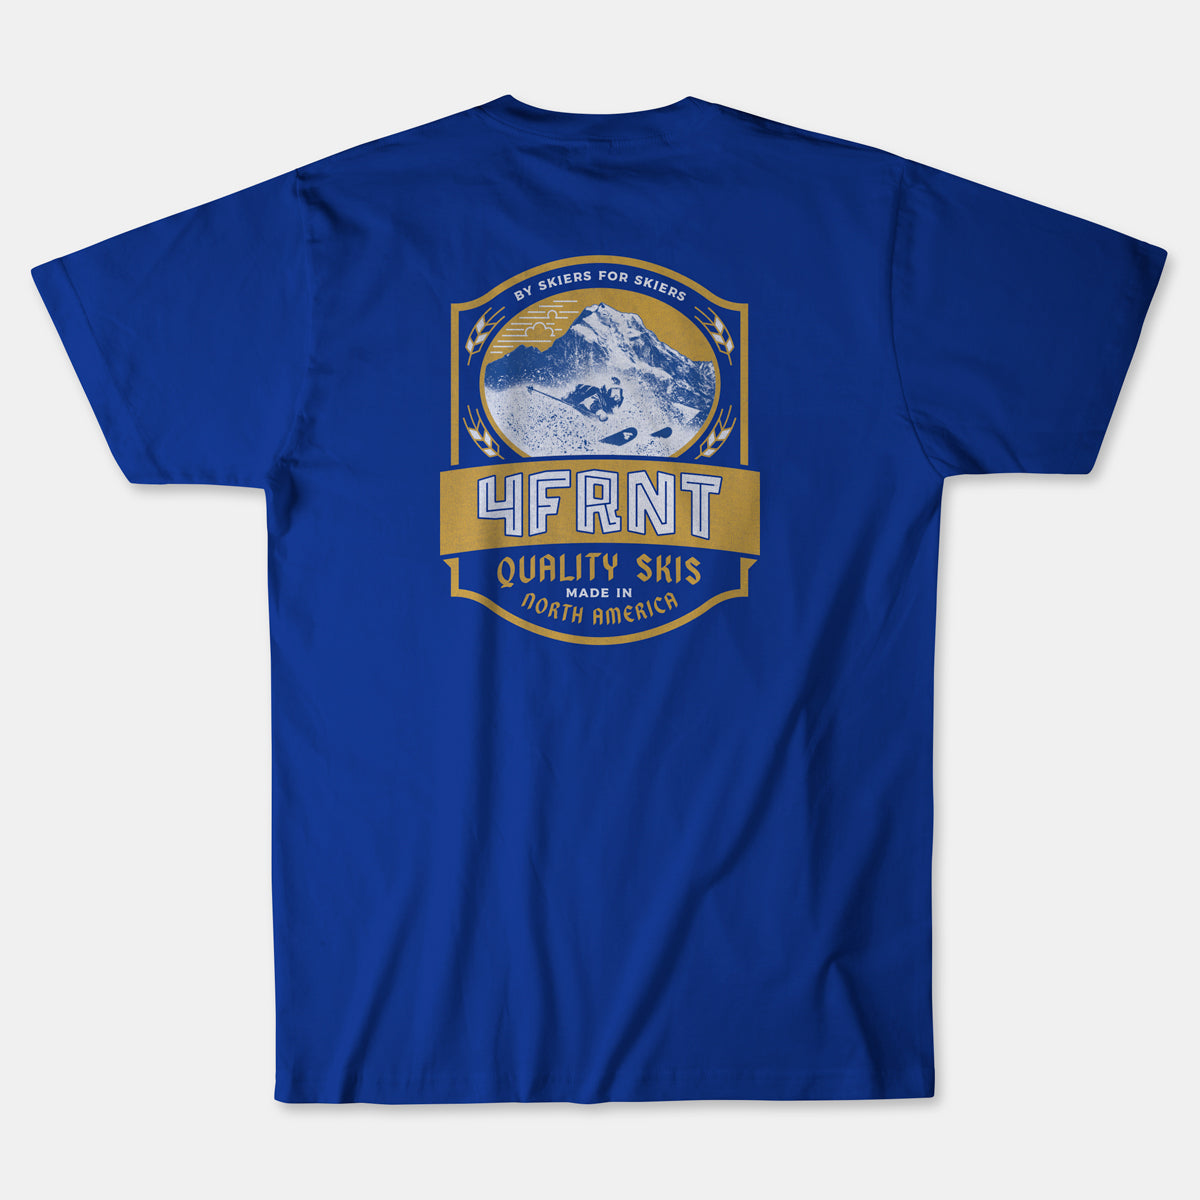 Beer Hall Tee from 4frnt skis